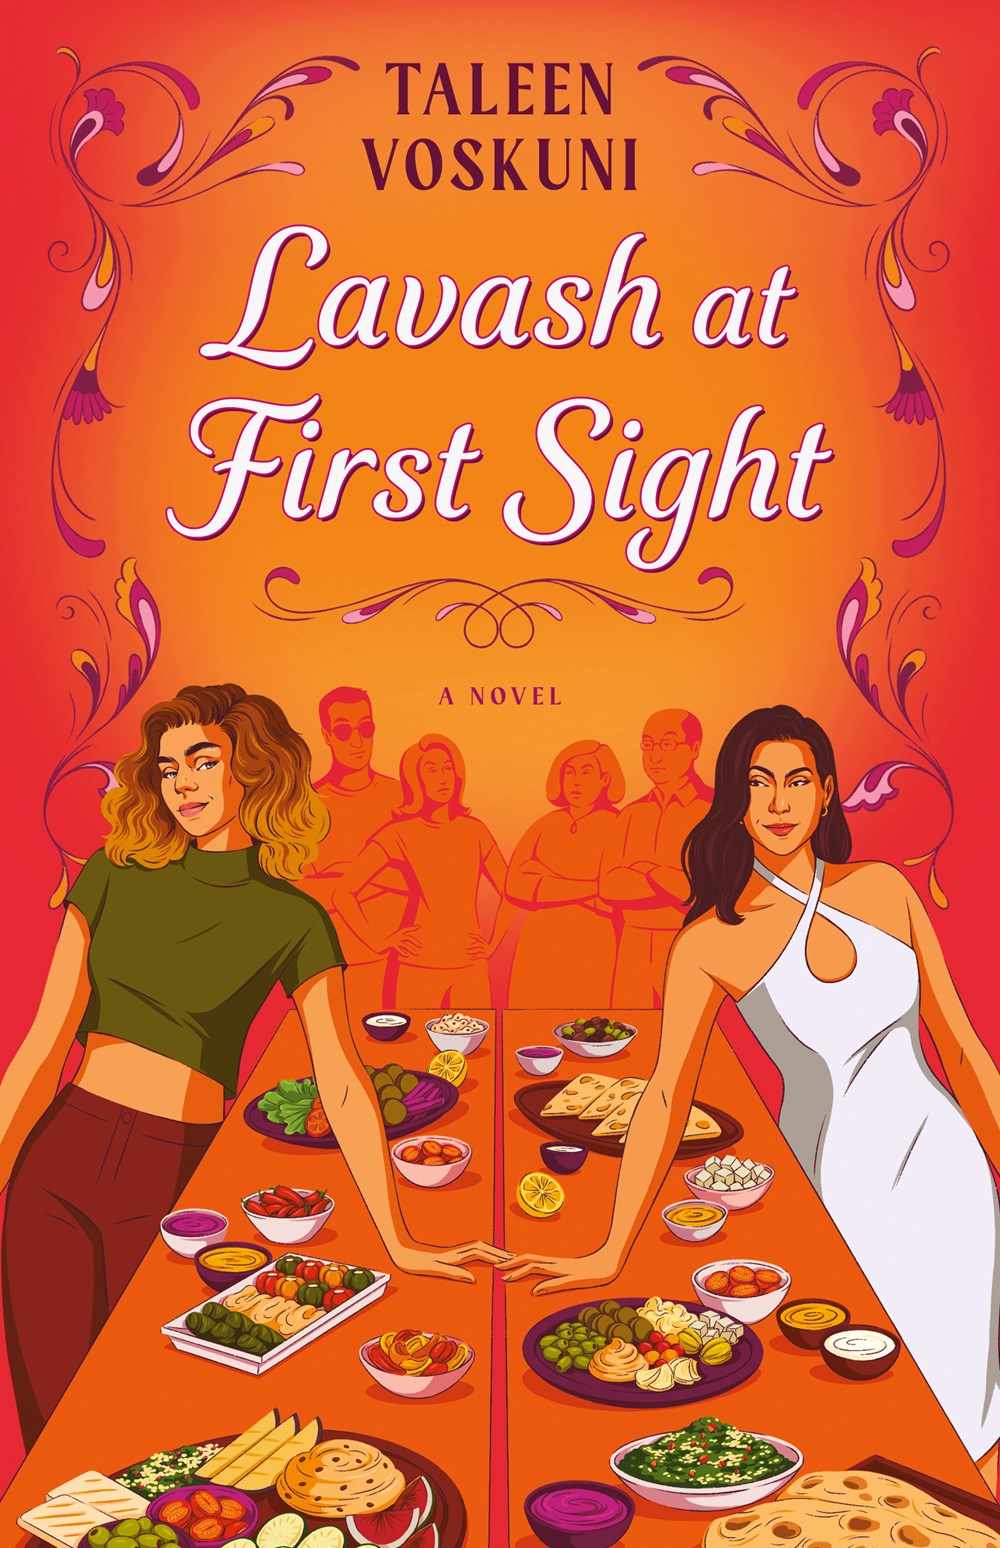 Lavash At First Sight by Taleen Voskuni (Paperback)